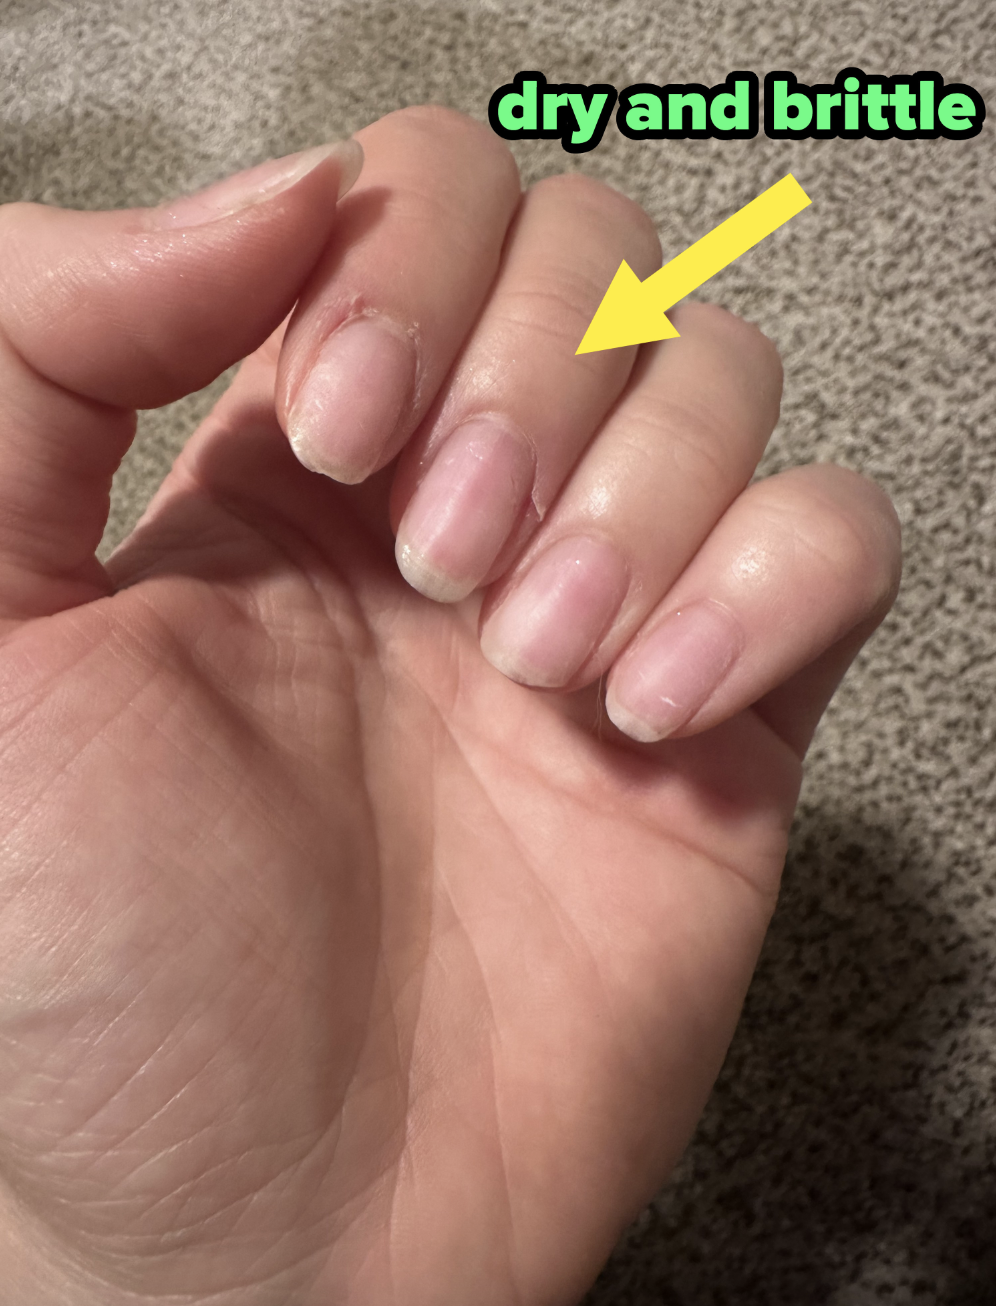 Bad Habits That Are Ruining Your Nails